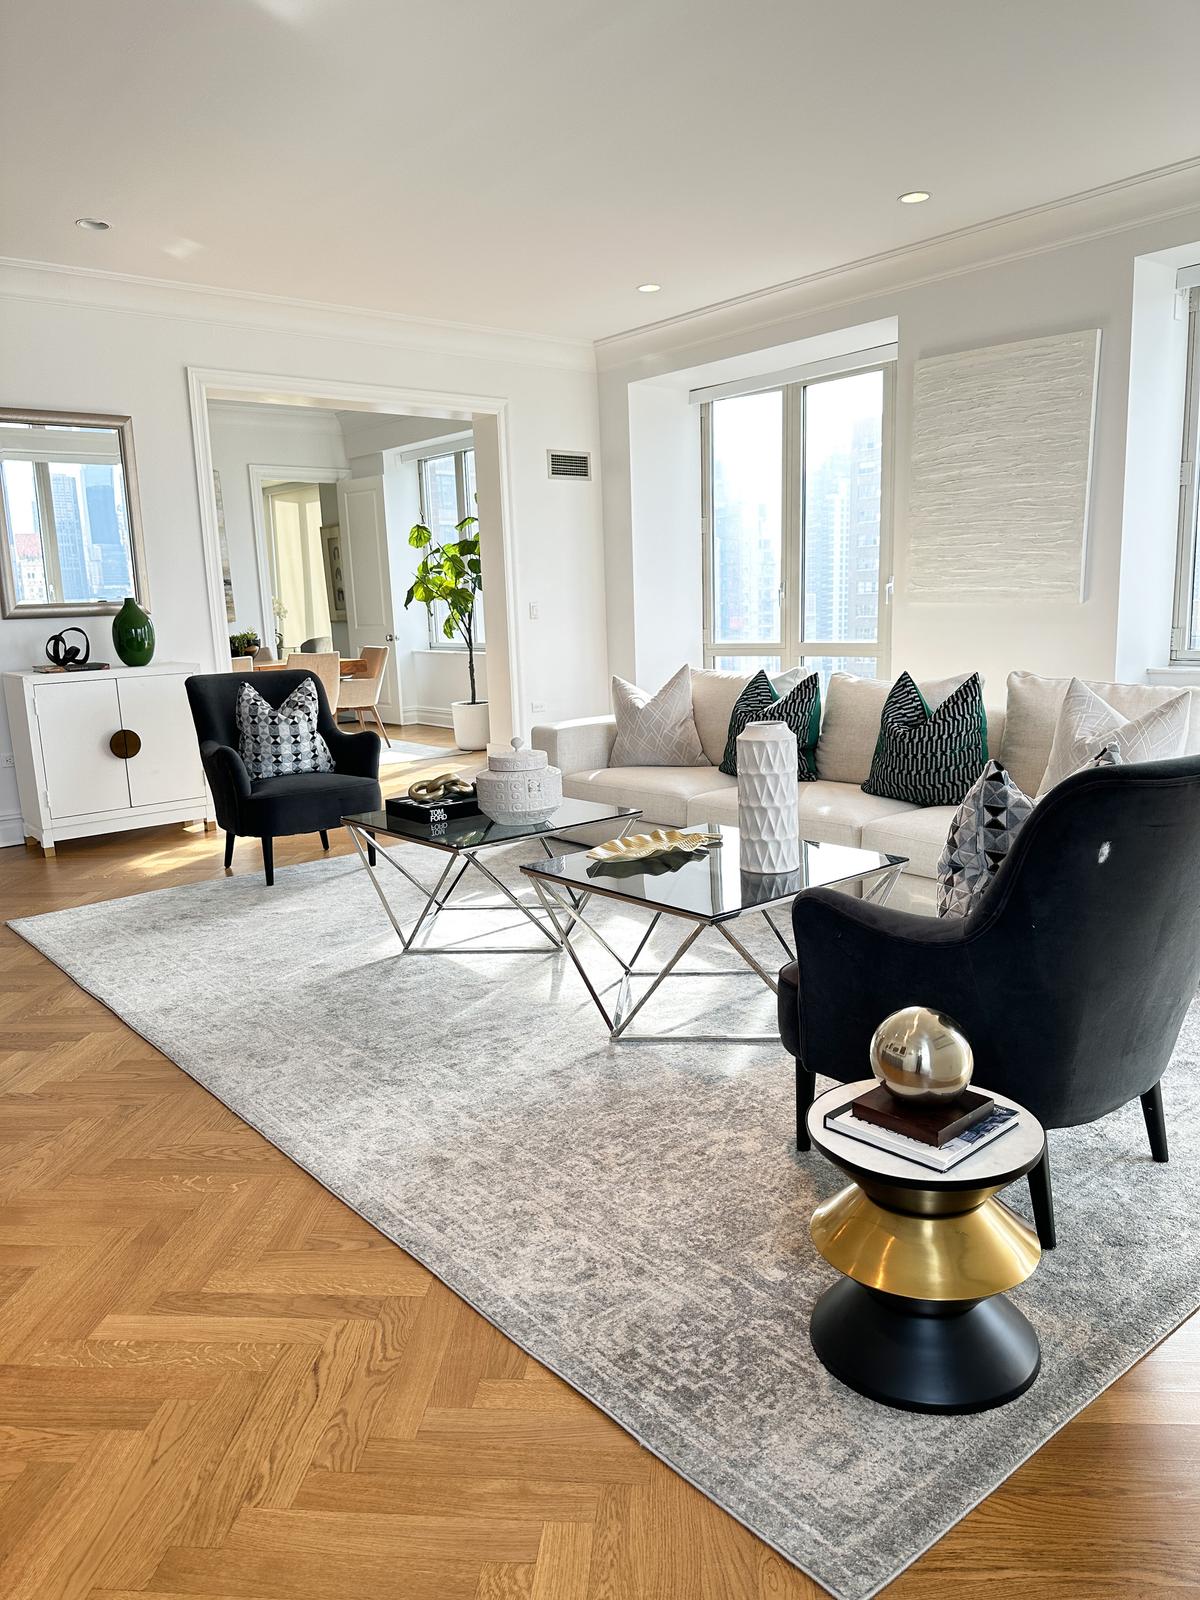 Elements of black, white, and gold are repeated throughout this living room to create a sense of cohesion. (Provided photo/TNS)